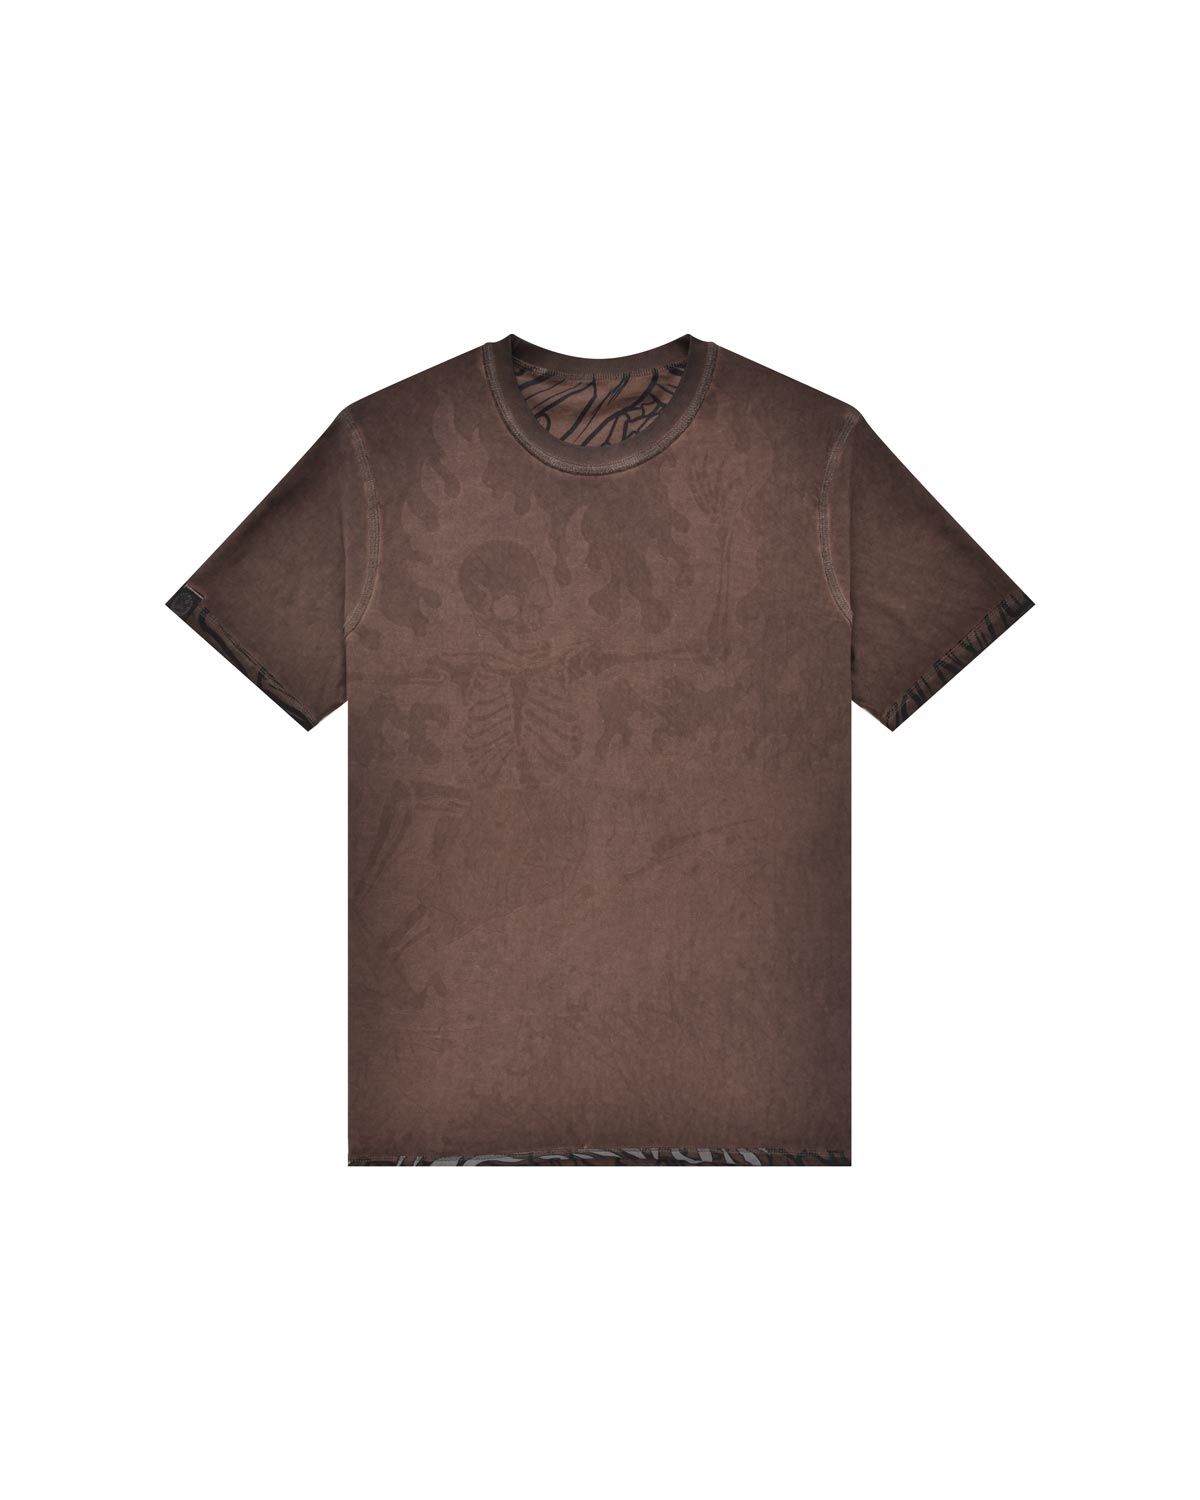 Uomo | T-Shirt Doubleface "Hell Of A Surfer" Color Tabacco